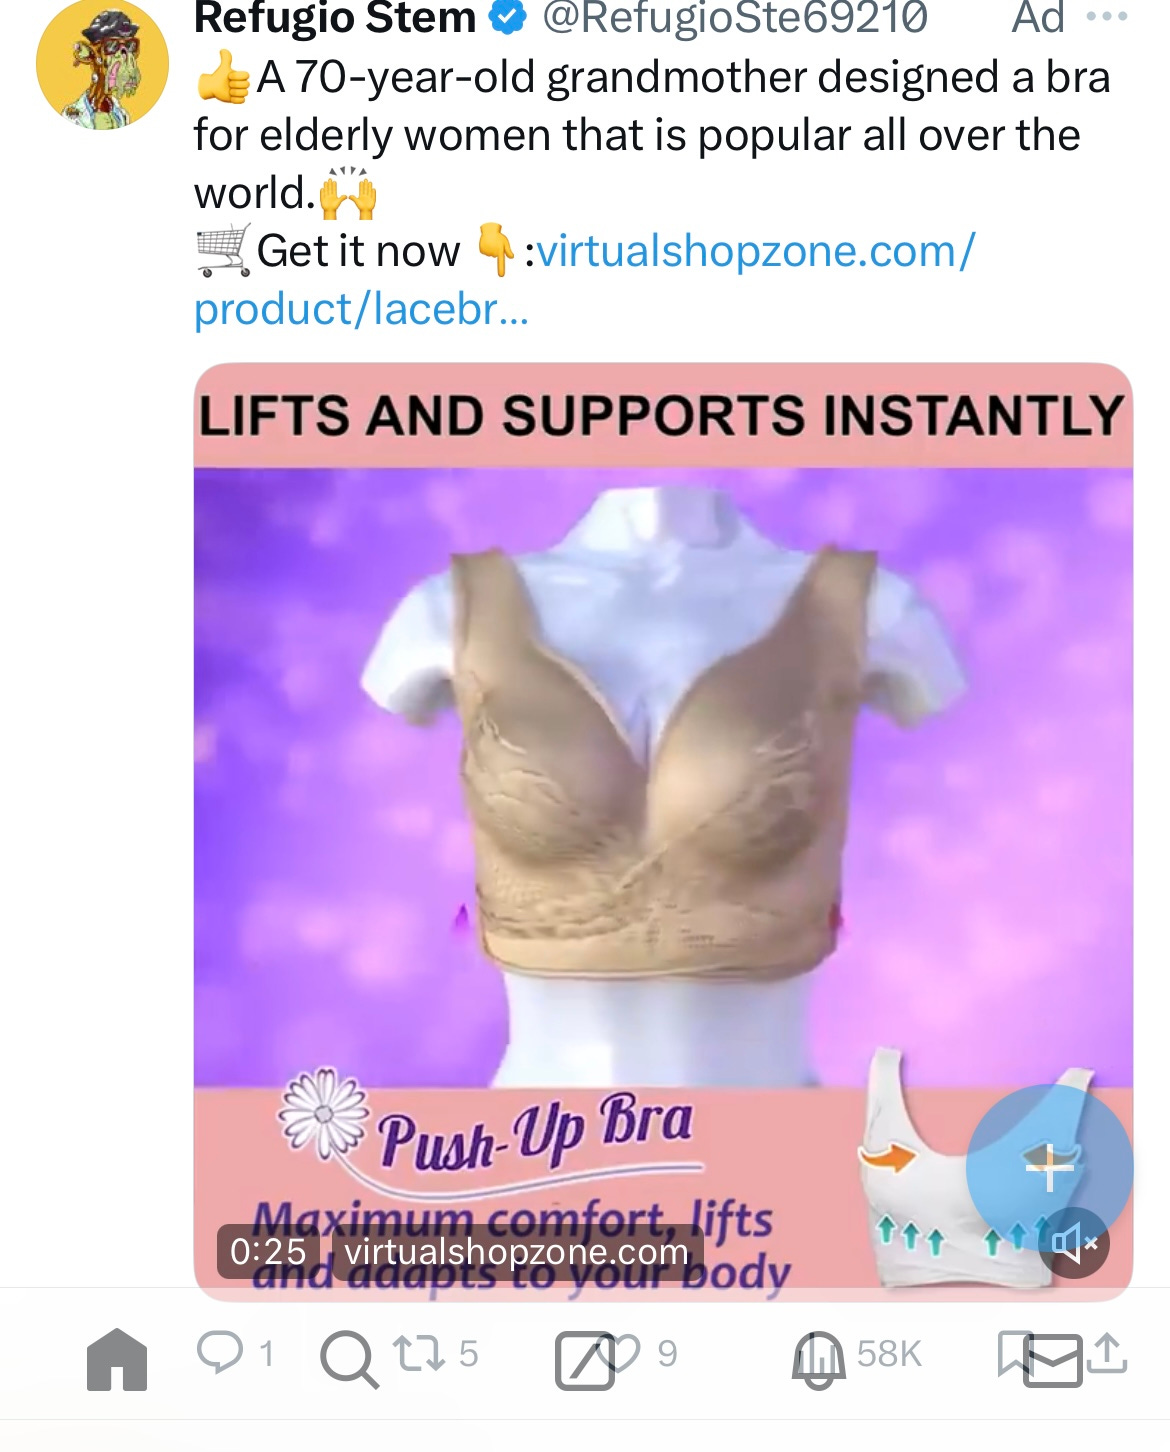 Ad I just saw on Twitter designed for small boobs. Most of the